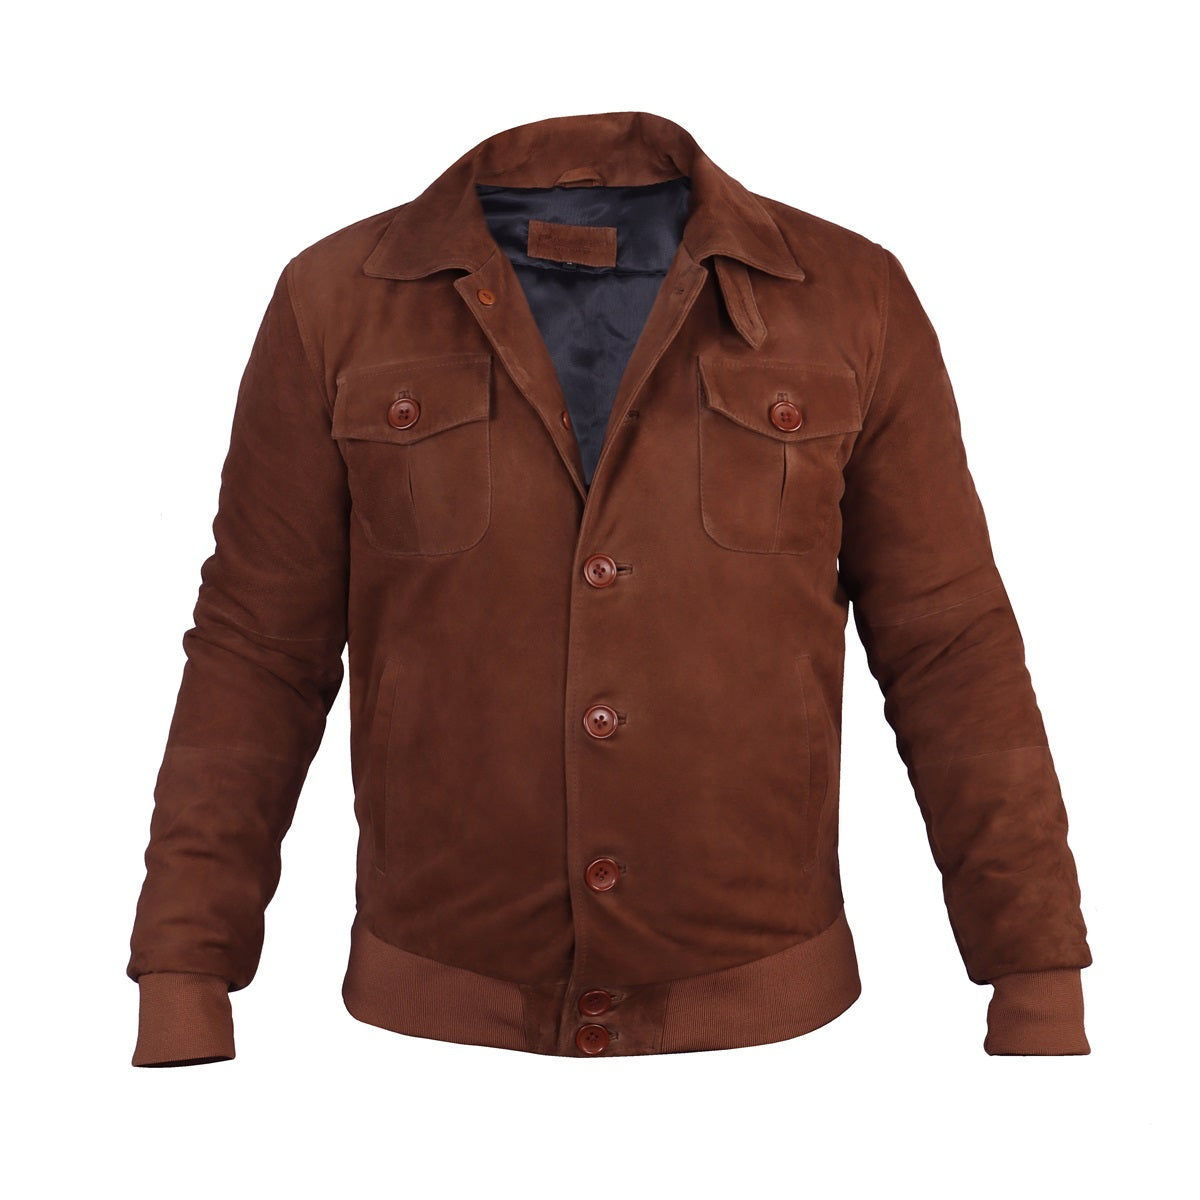 Dual Collar Bomber Tan Suede Leather Jacket For Men with Flap Pockets